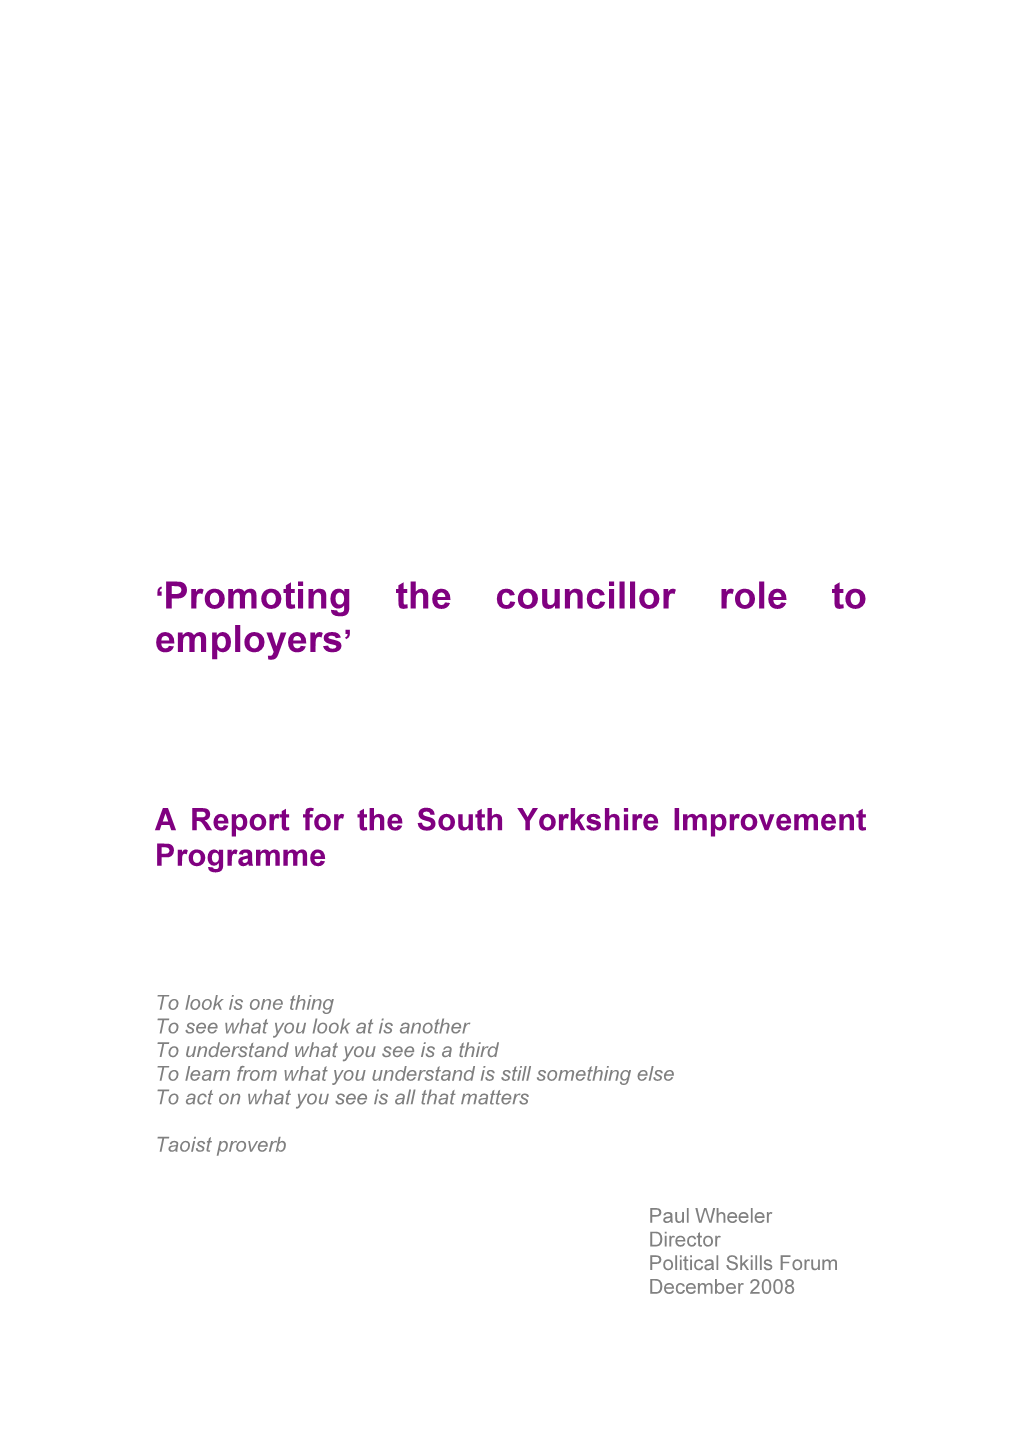 'Promoting the Councillor Role to Employers'